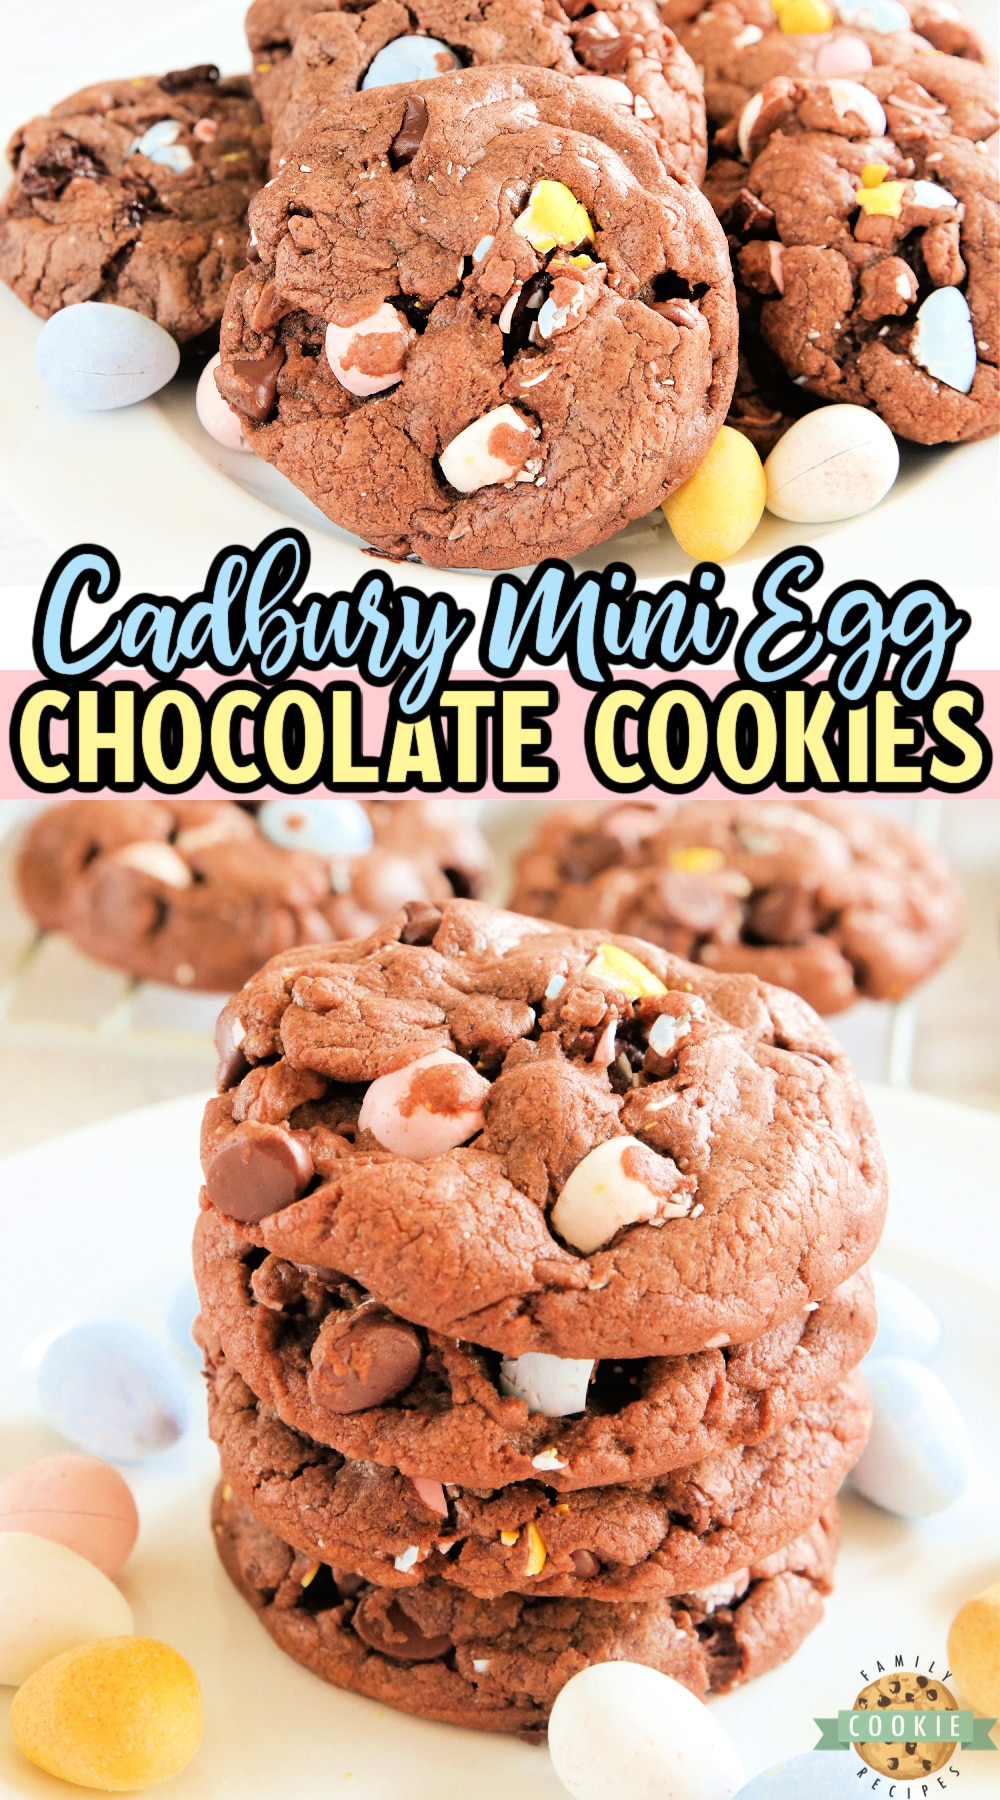 Cadbury Mini Egg Chocolate Cookies are soft, chewy and full of your favorite Easter candy! Delicious chocolate cookie recipe made with chocolate pudding mix, chocolate chips and crushed Cadbury Mini Eggs.